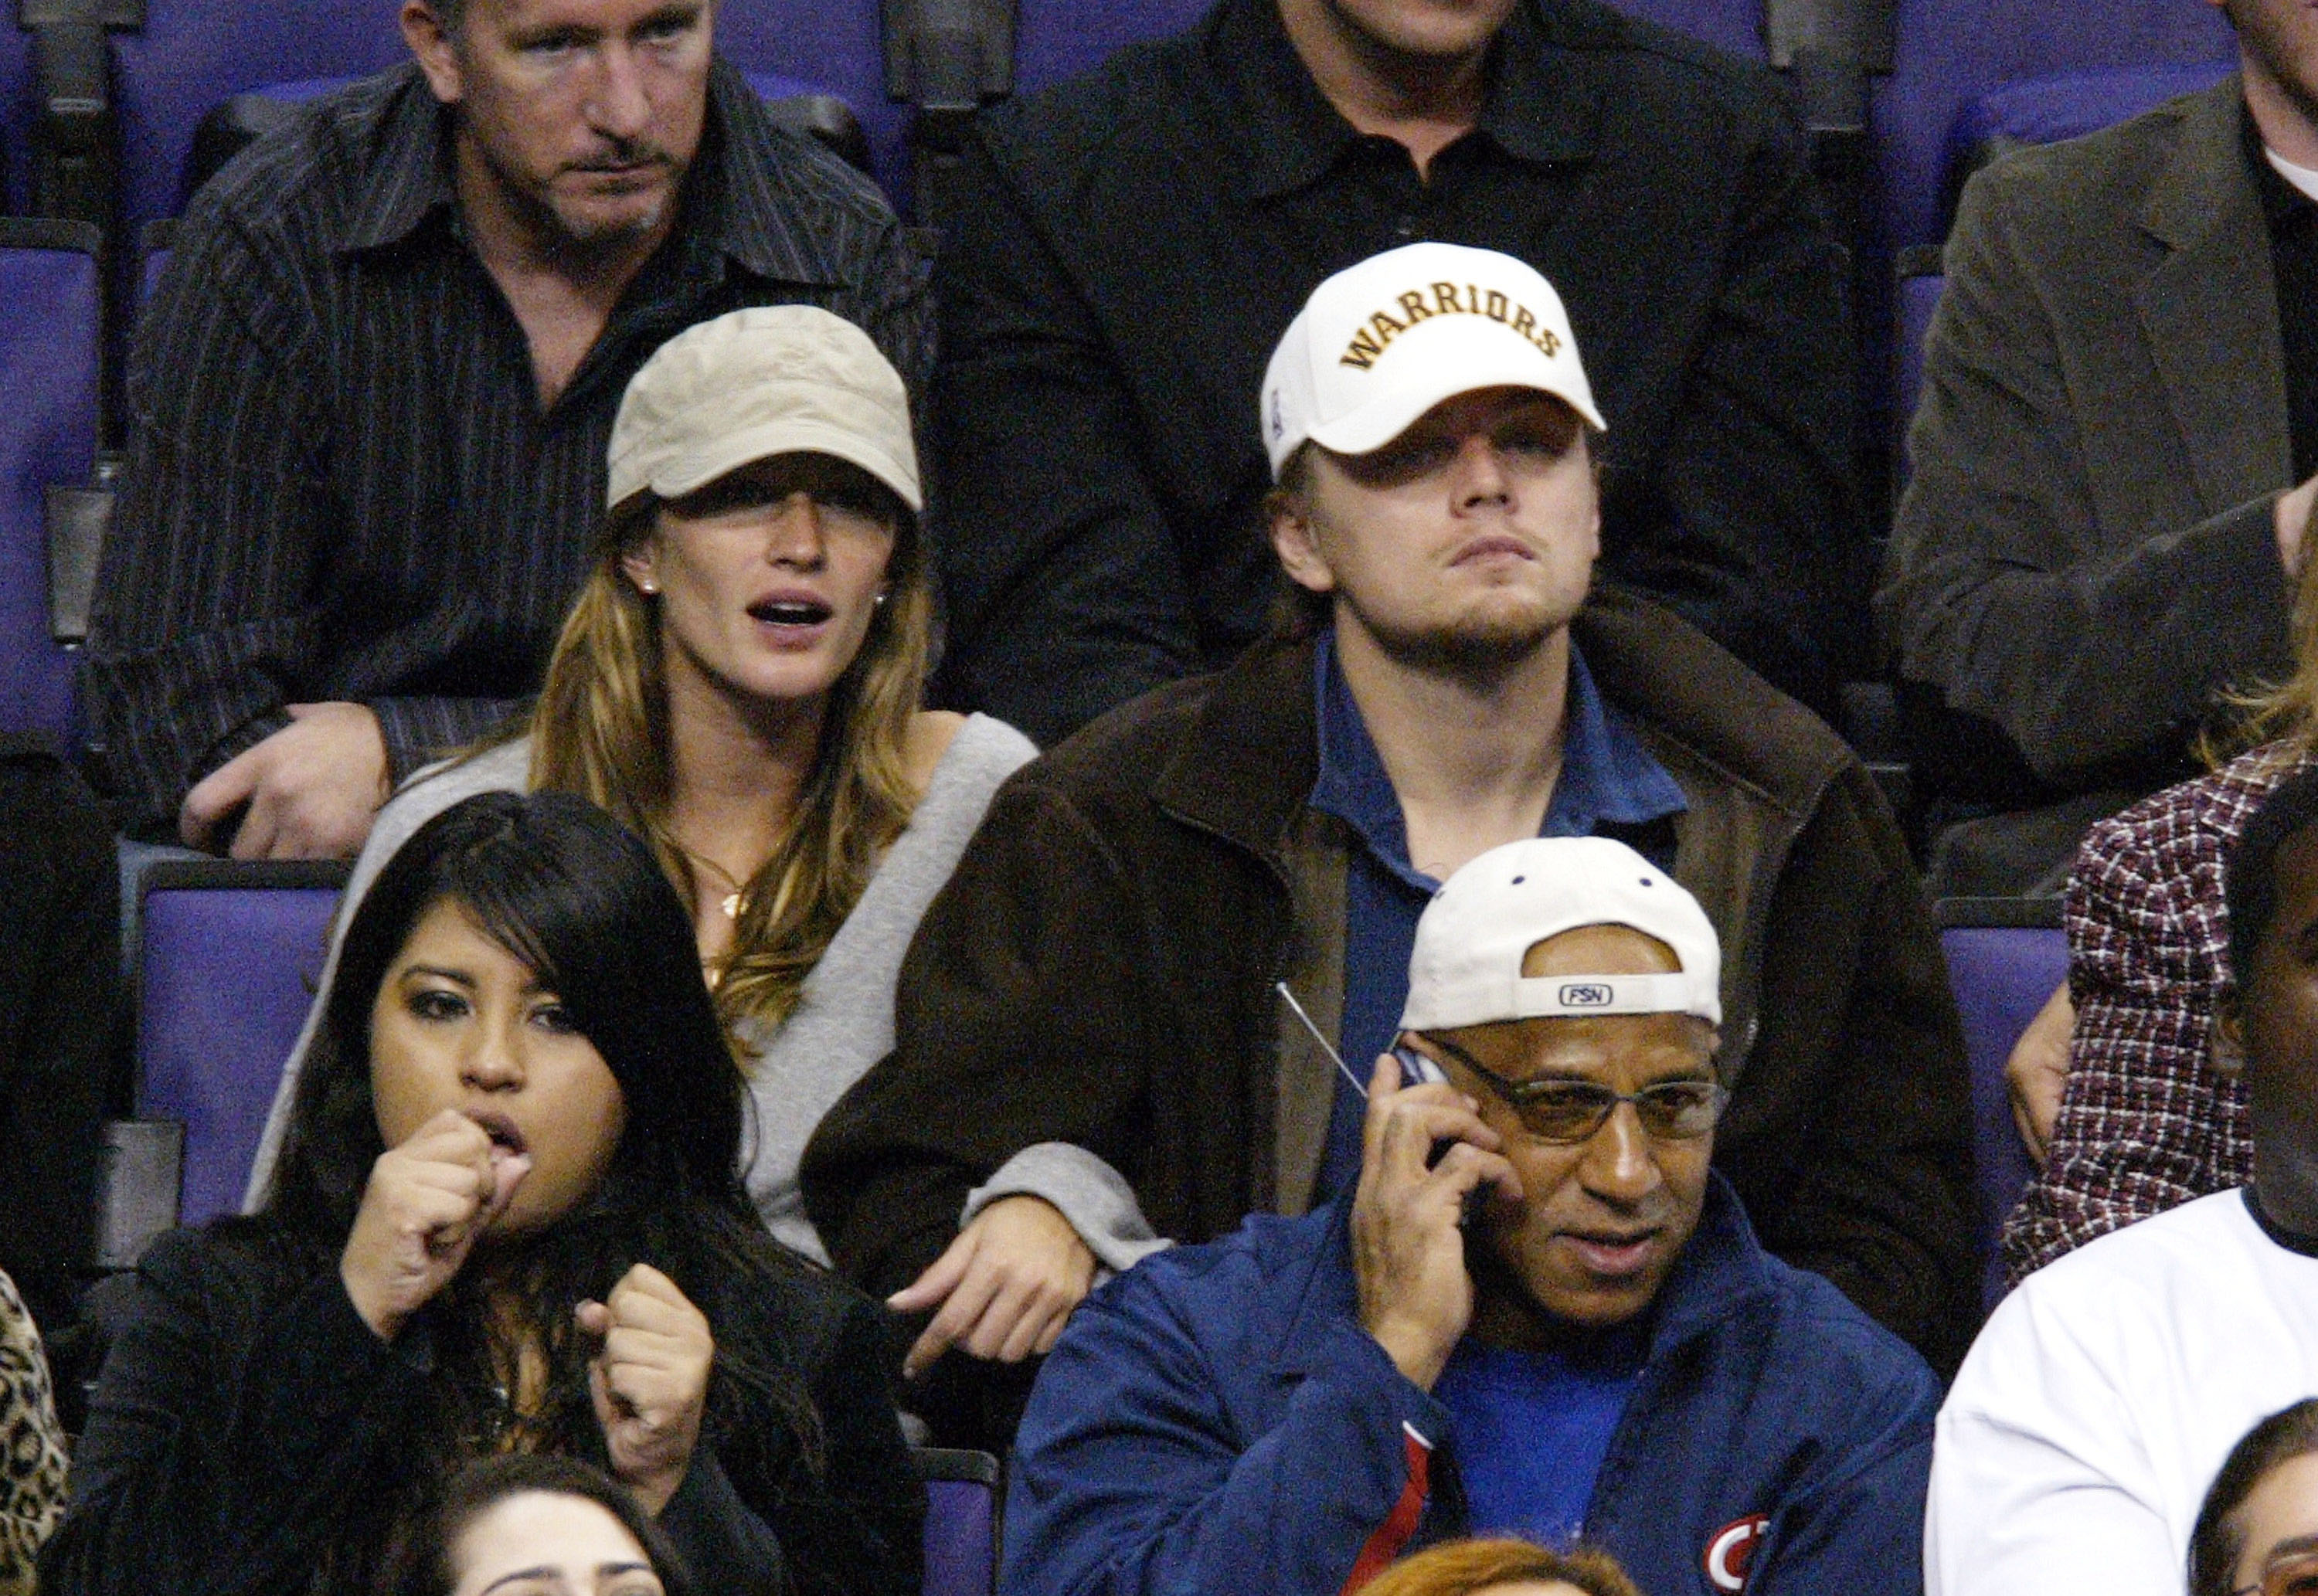 Gisele Bündchen and her boyfriend Leonardo DiCaprio at a Los Angeles Lakers and the San Antonio Spurs game at the Staples Center on November 5, 2004, in Los Angeles, California | Source: Getty Images